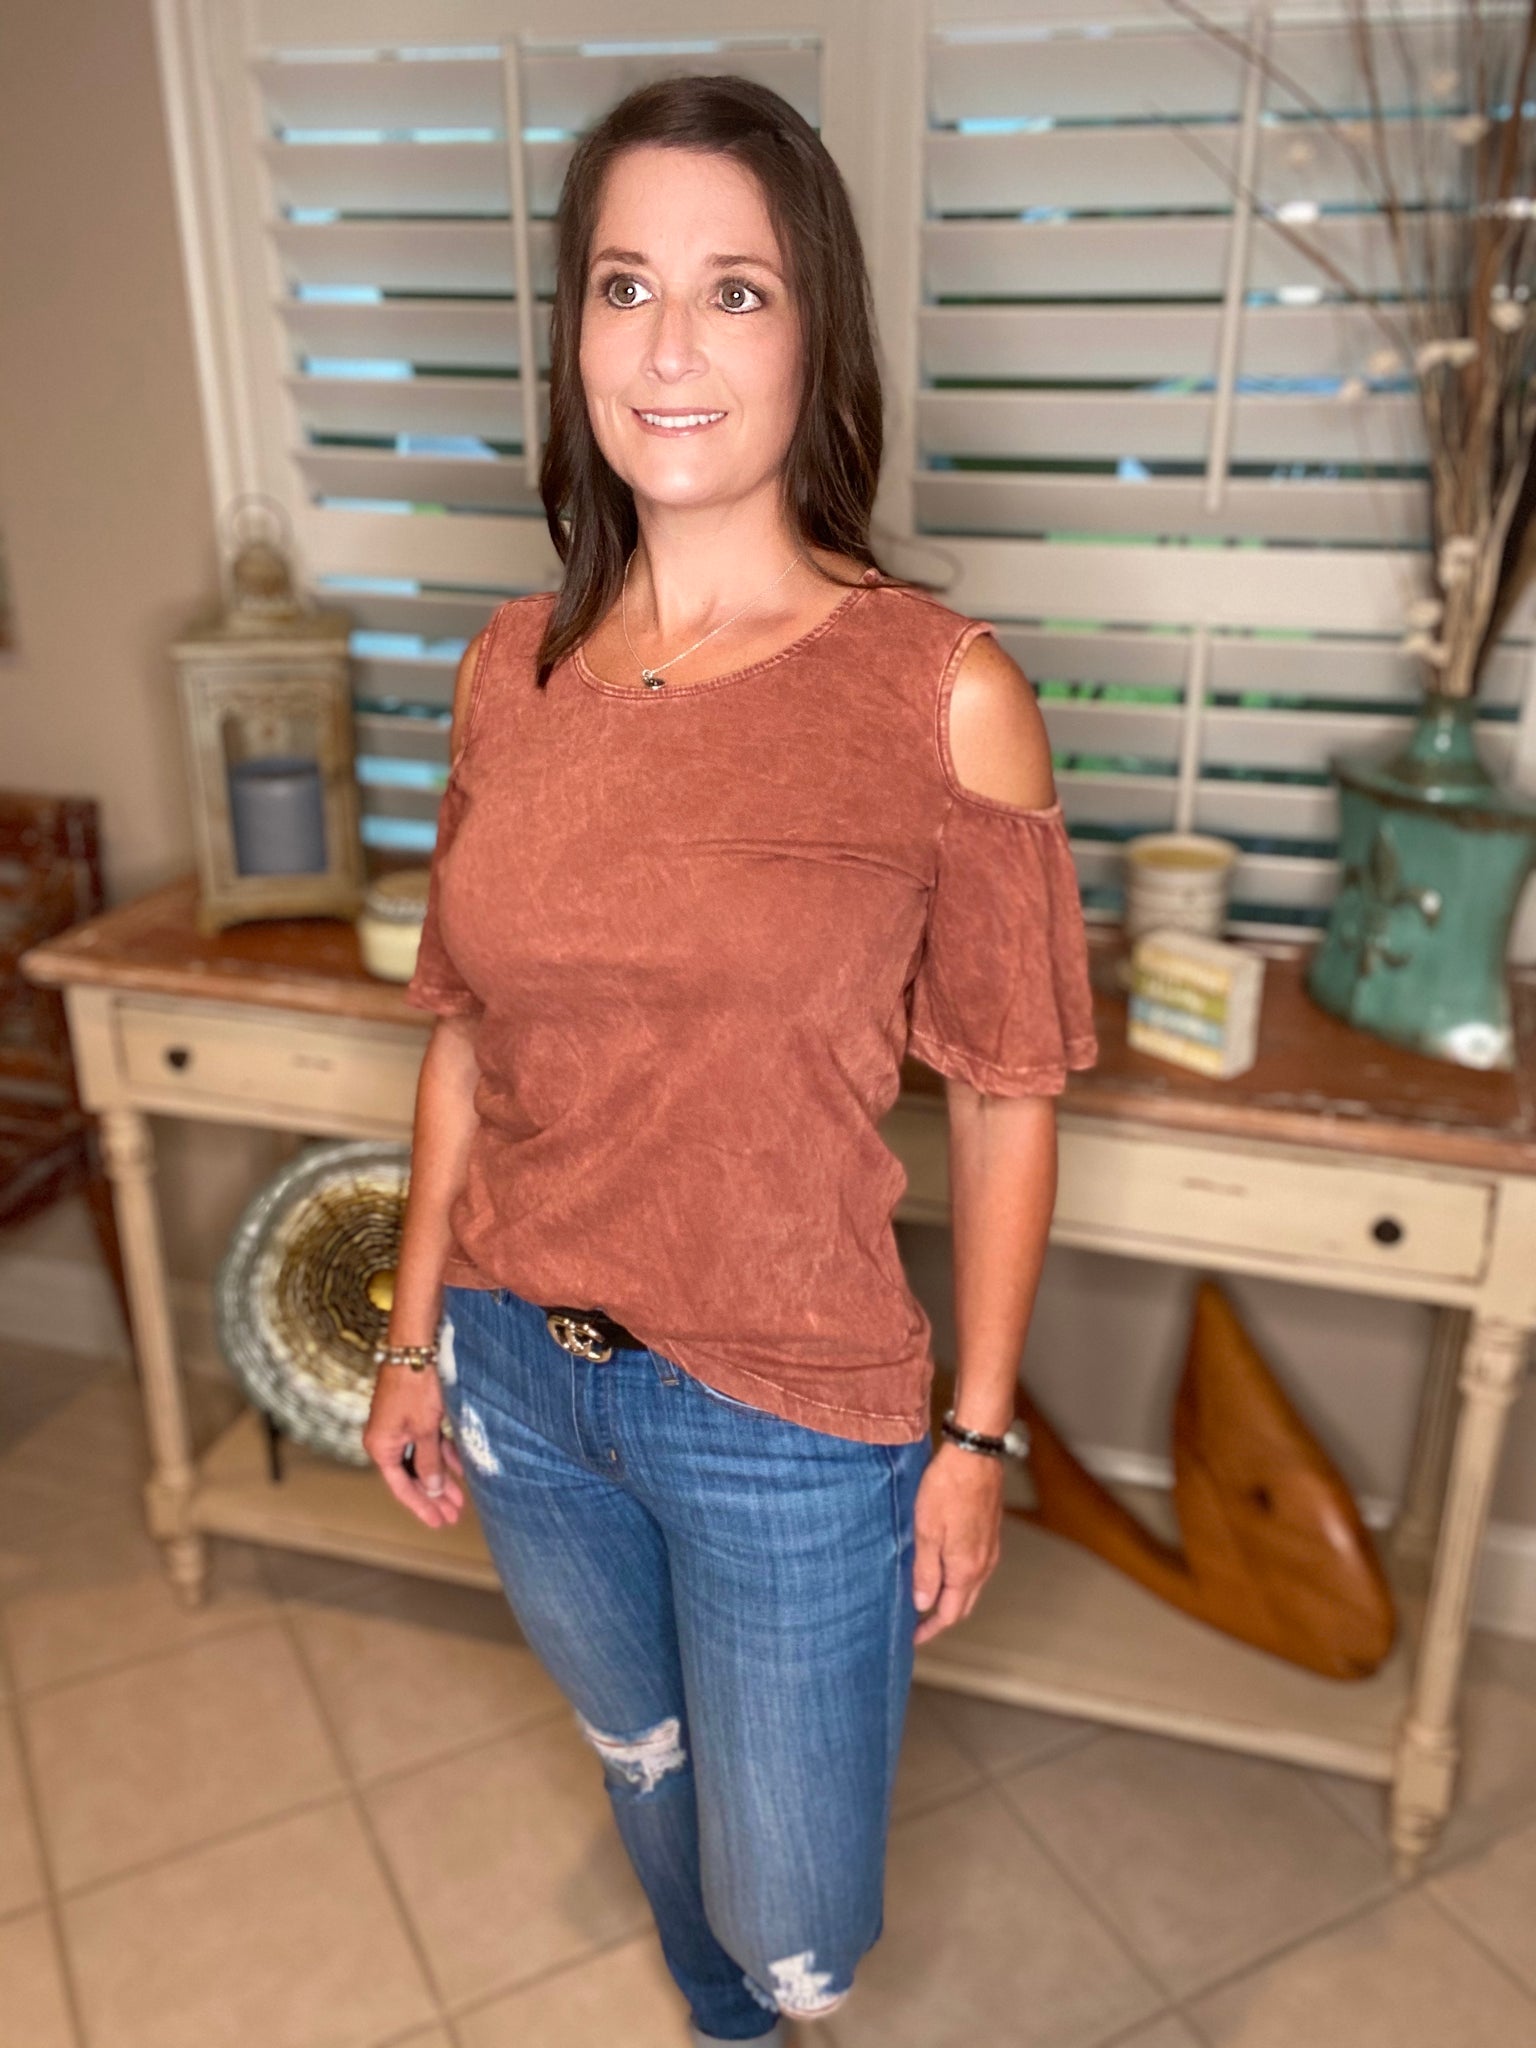 Sexy Scoop Neck Bell Sleeve Cold Shoulder Cutout Top Mineral Wash Rust